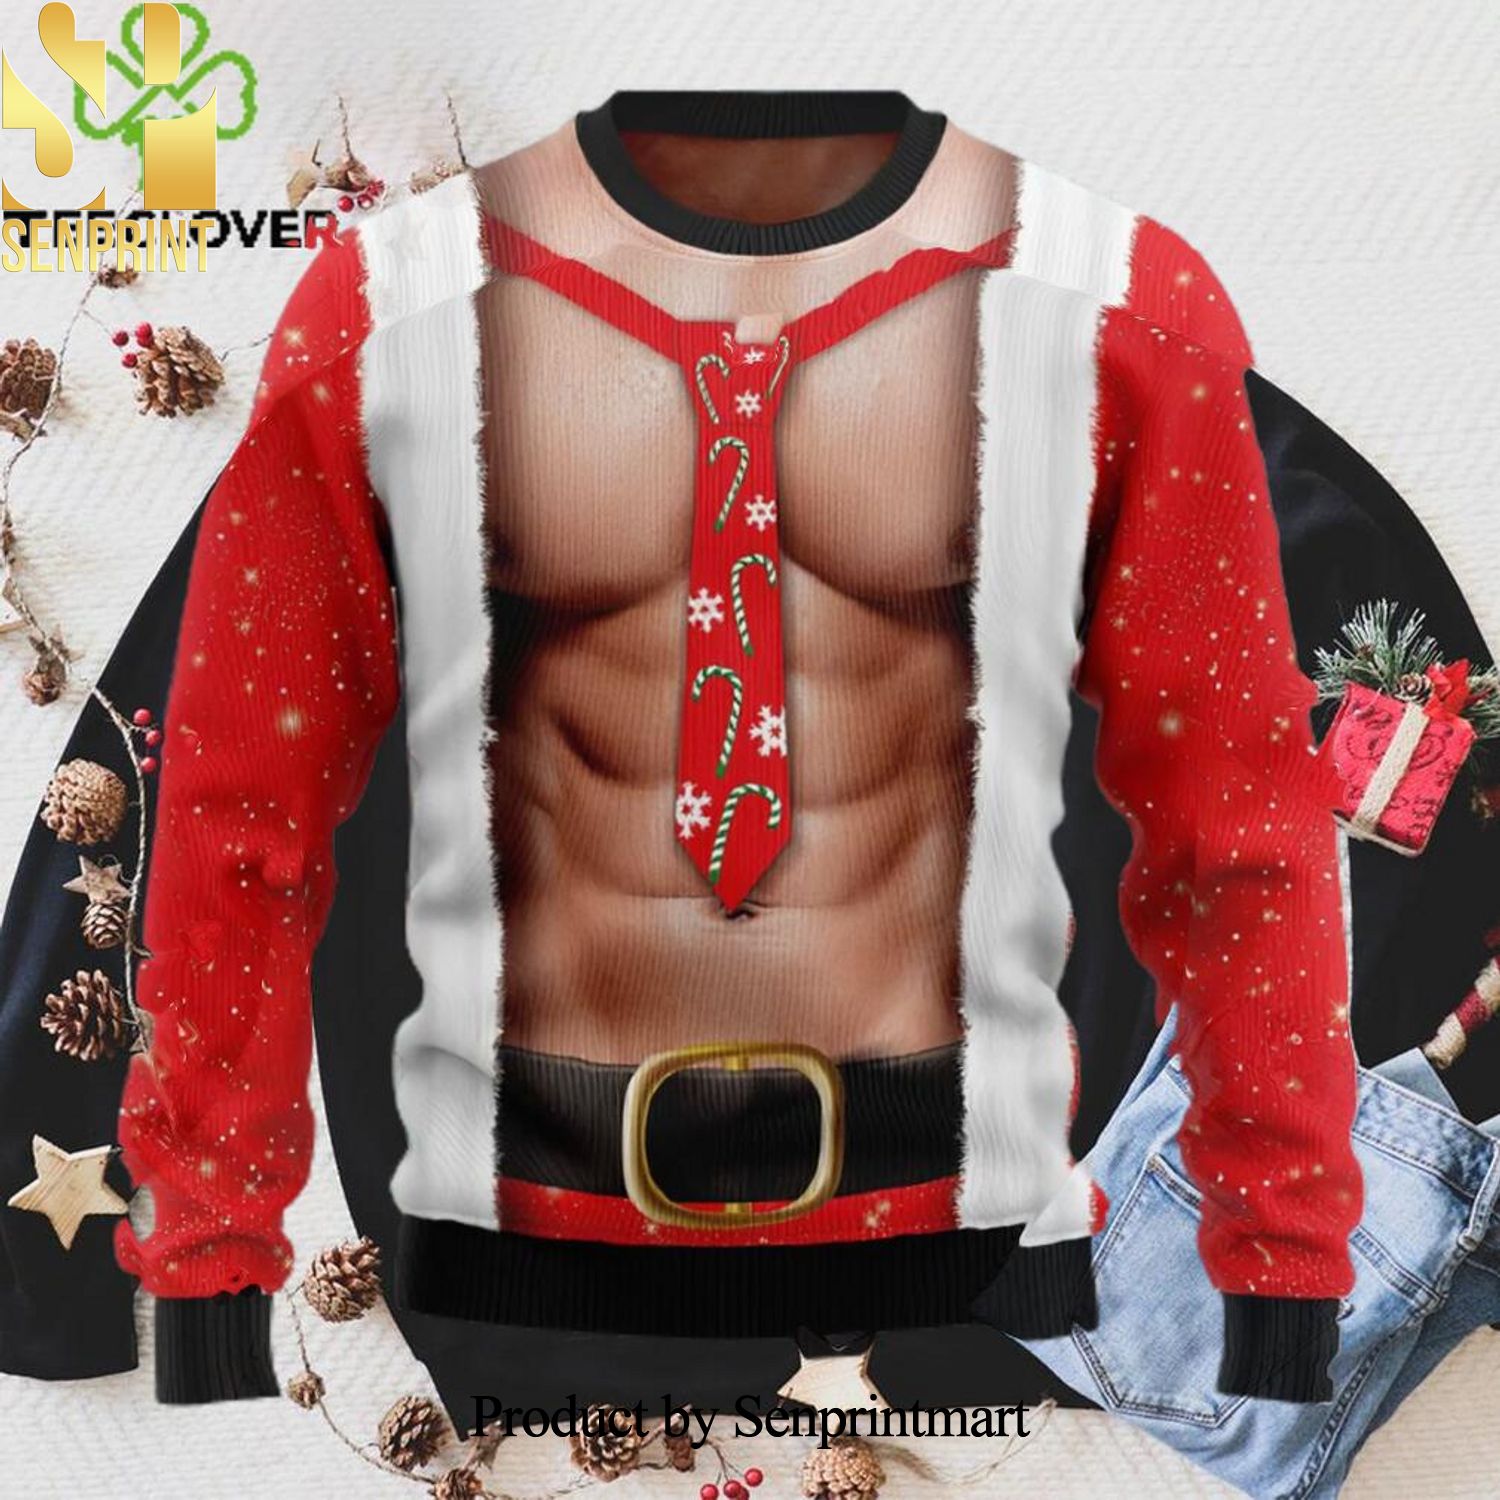 Funny Six Pack Muscle Ugly Christmas Holiday Sweater